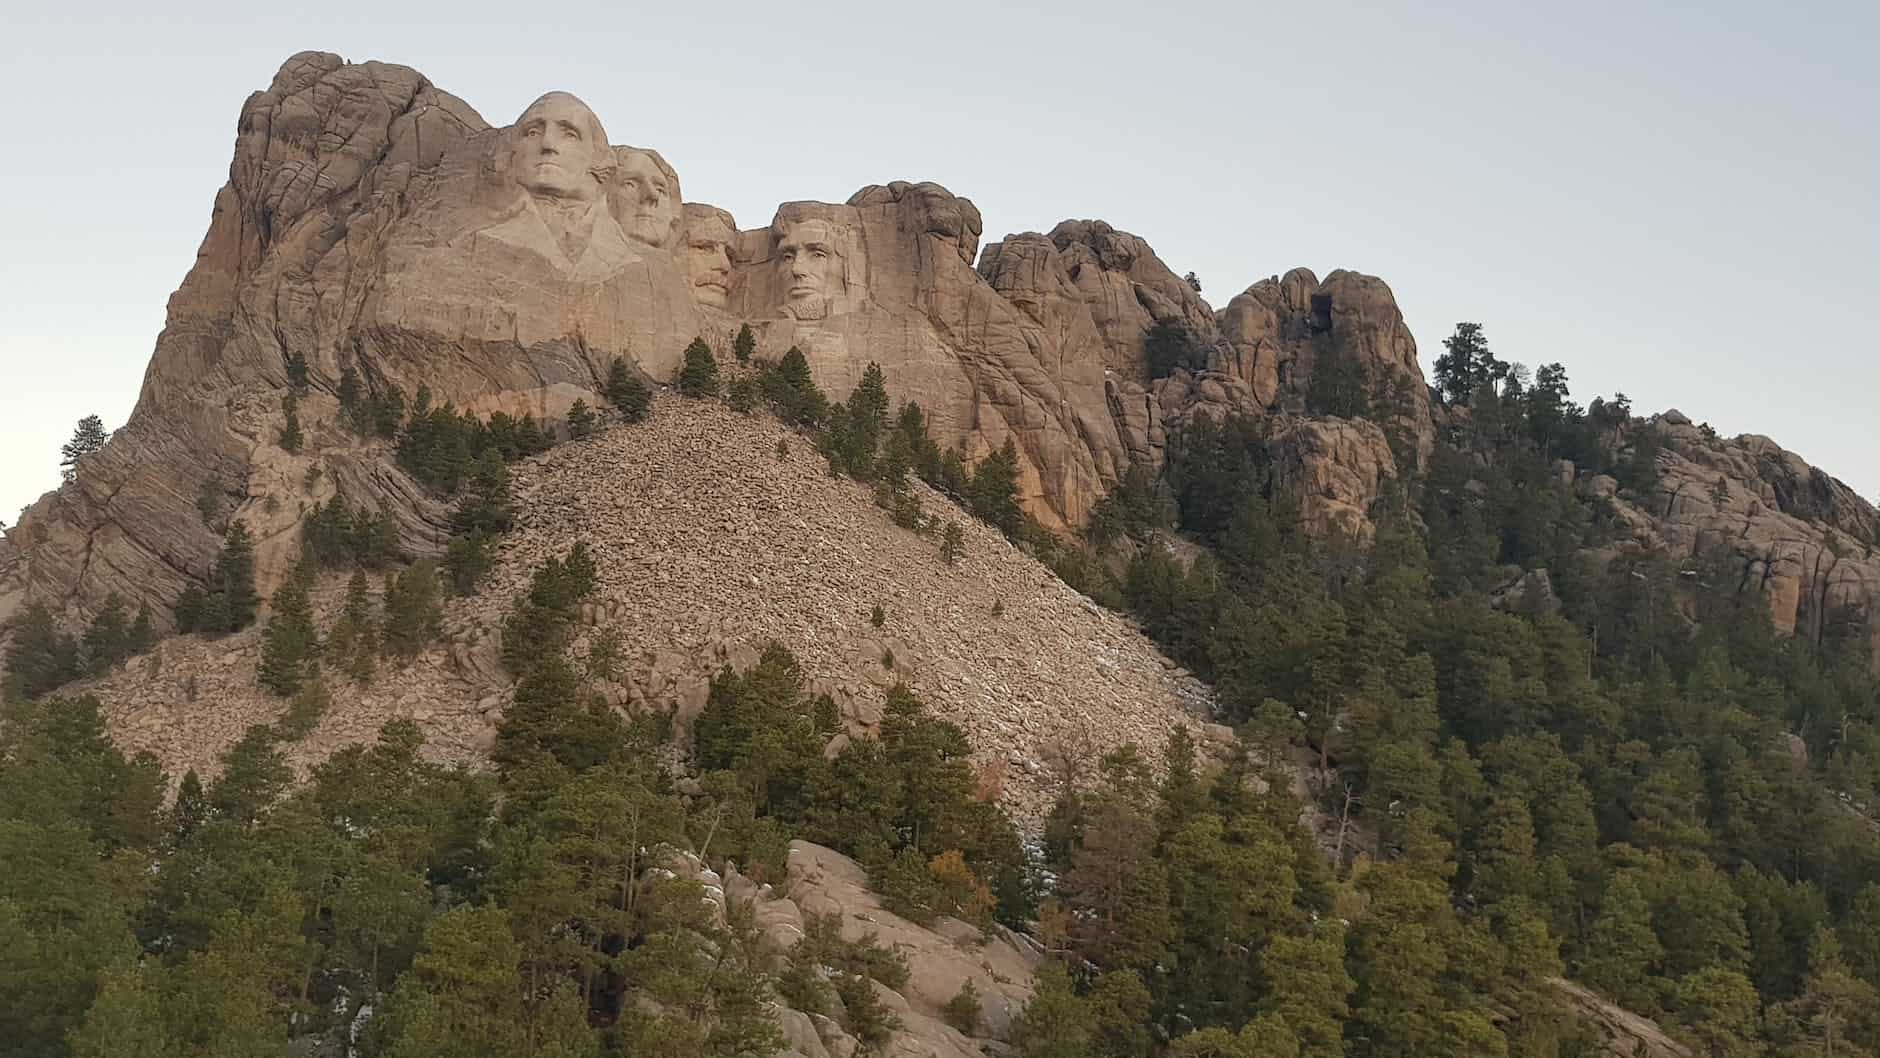 gigantic faces carved on rough mountain slope